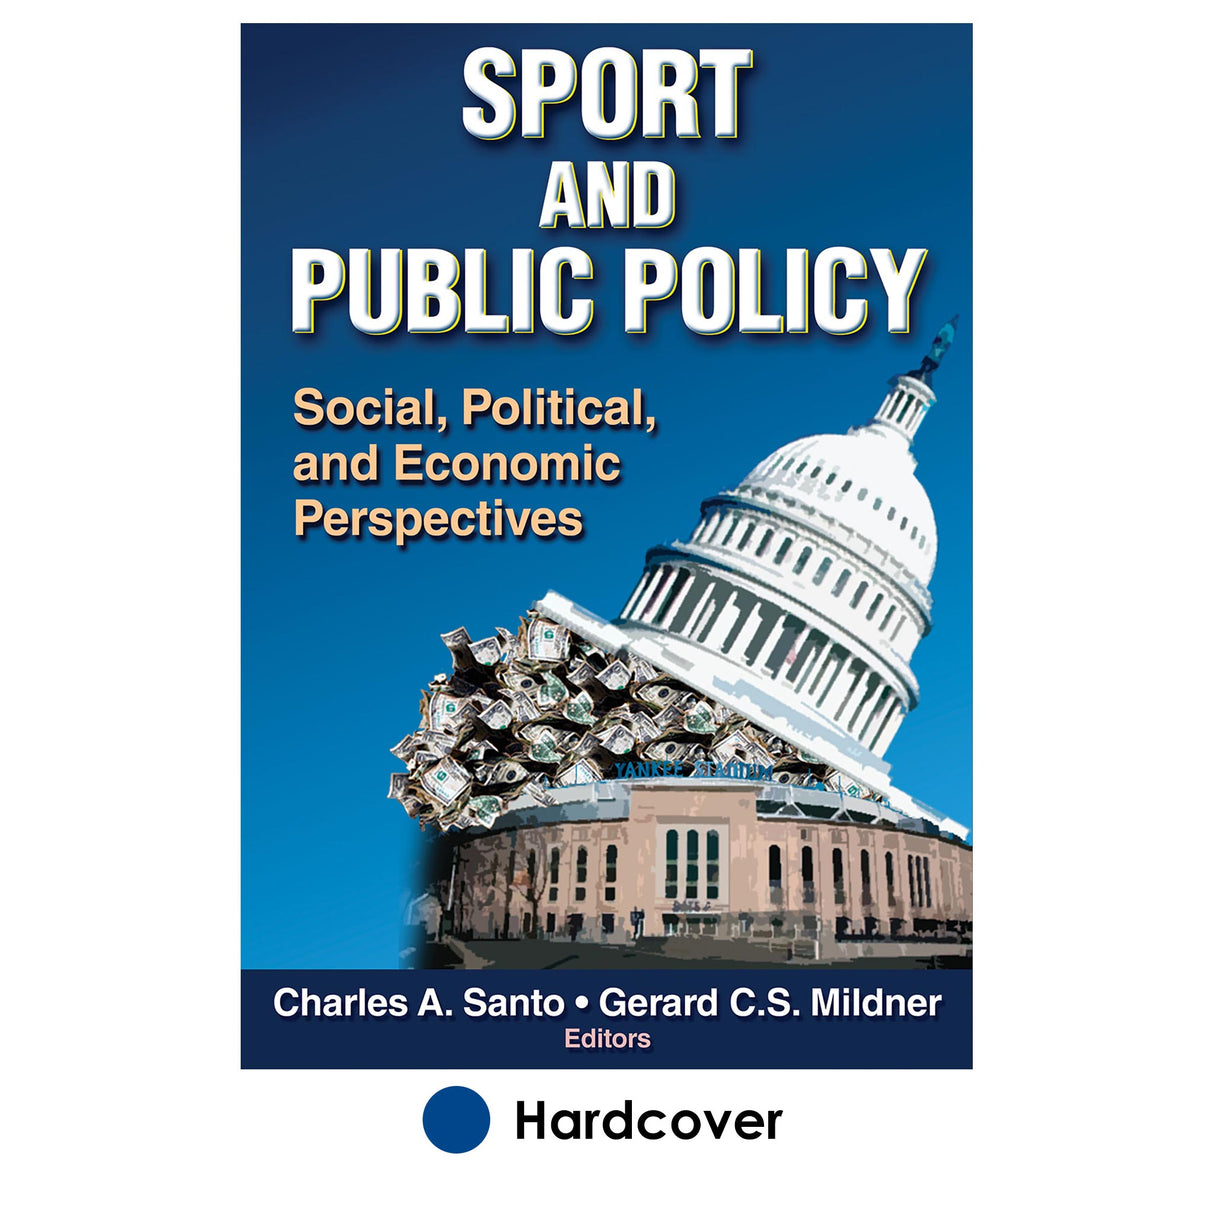 Sport and Public Policy